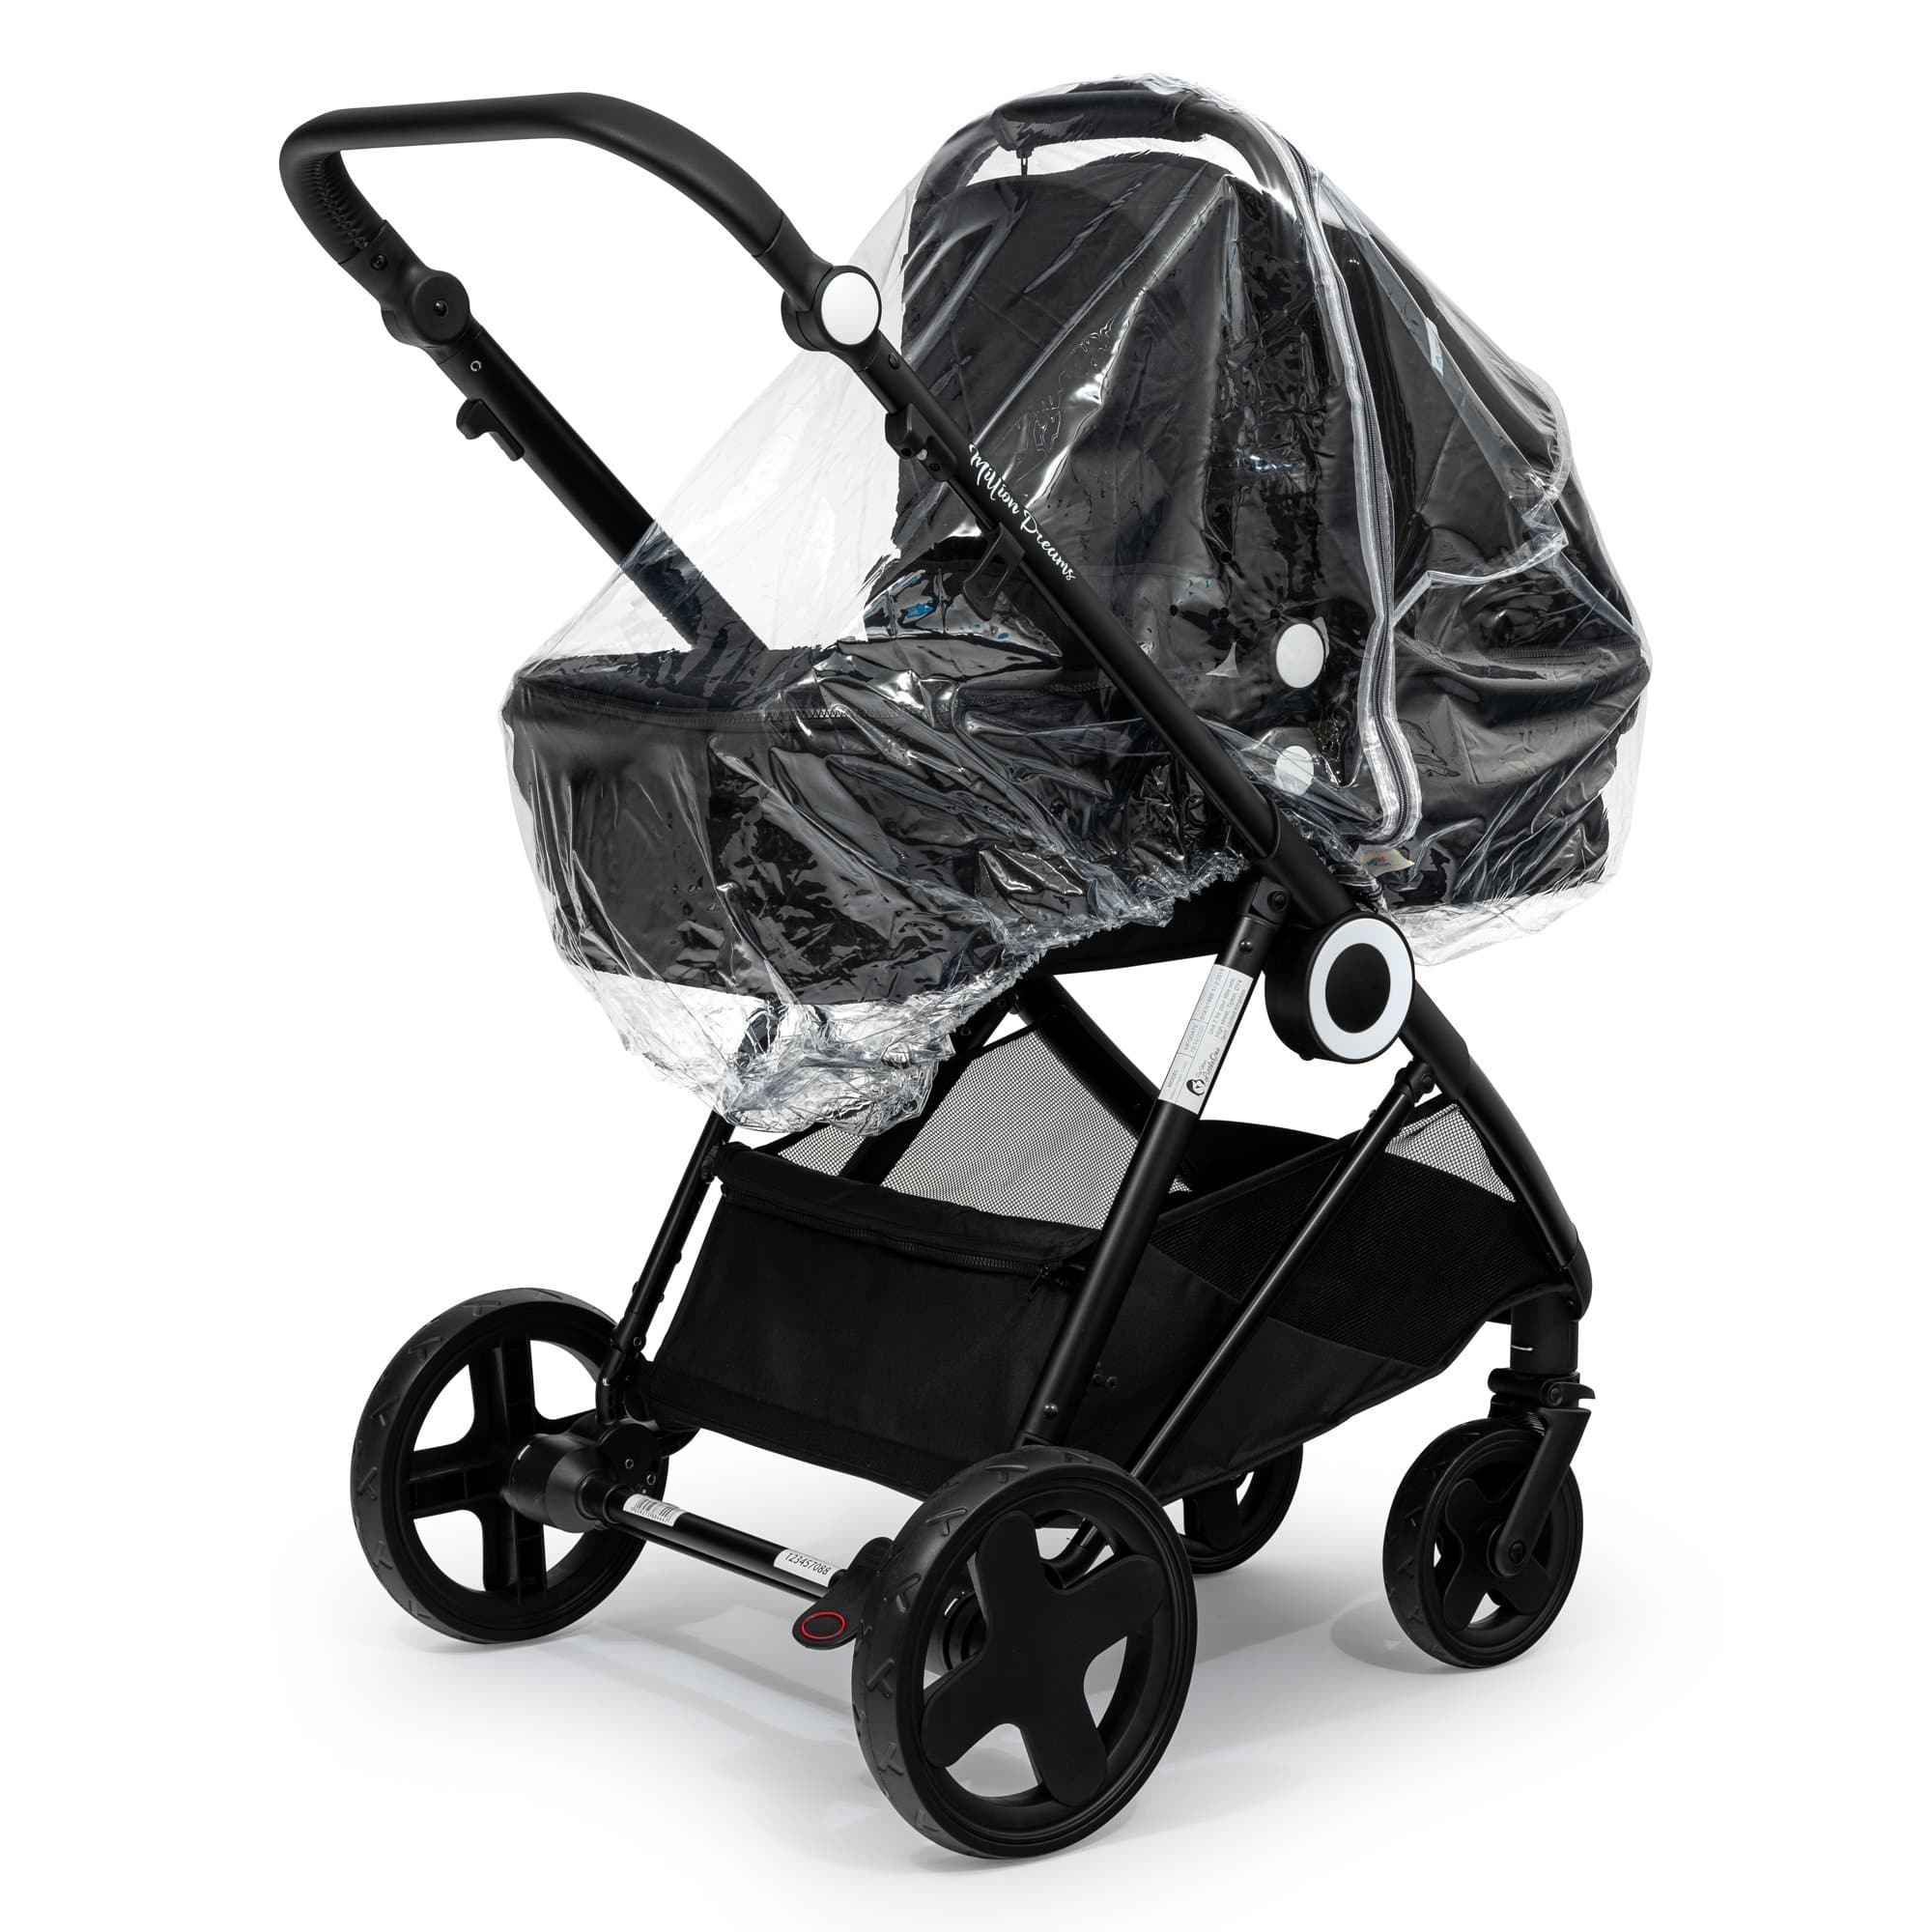 2 in 1 Rain Cover Compatible with Babywelt - Fits All Models - For Your Little One